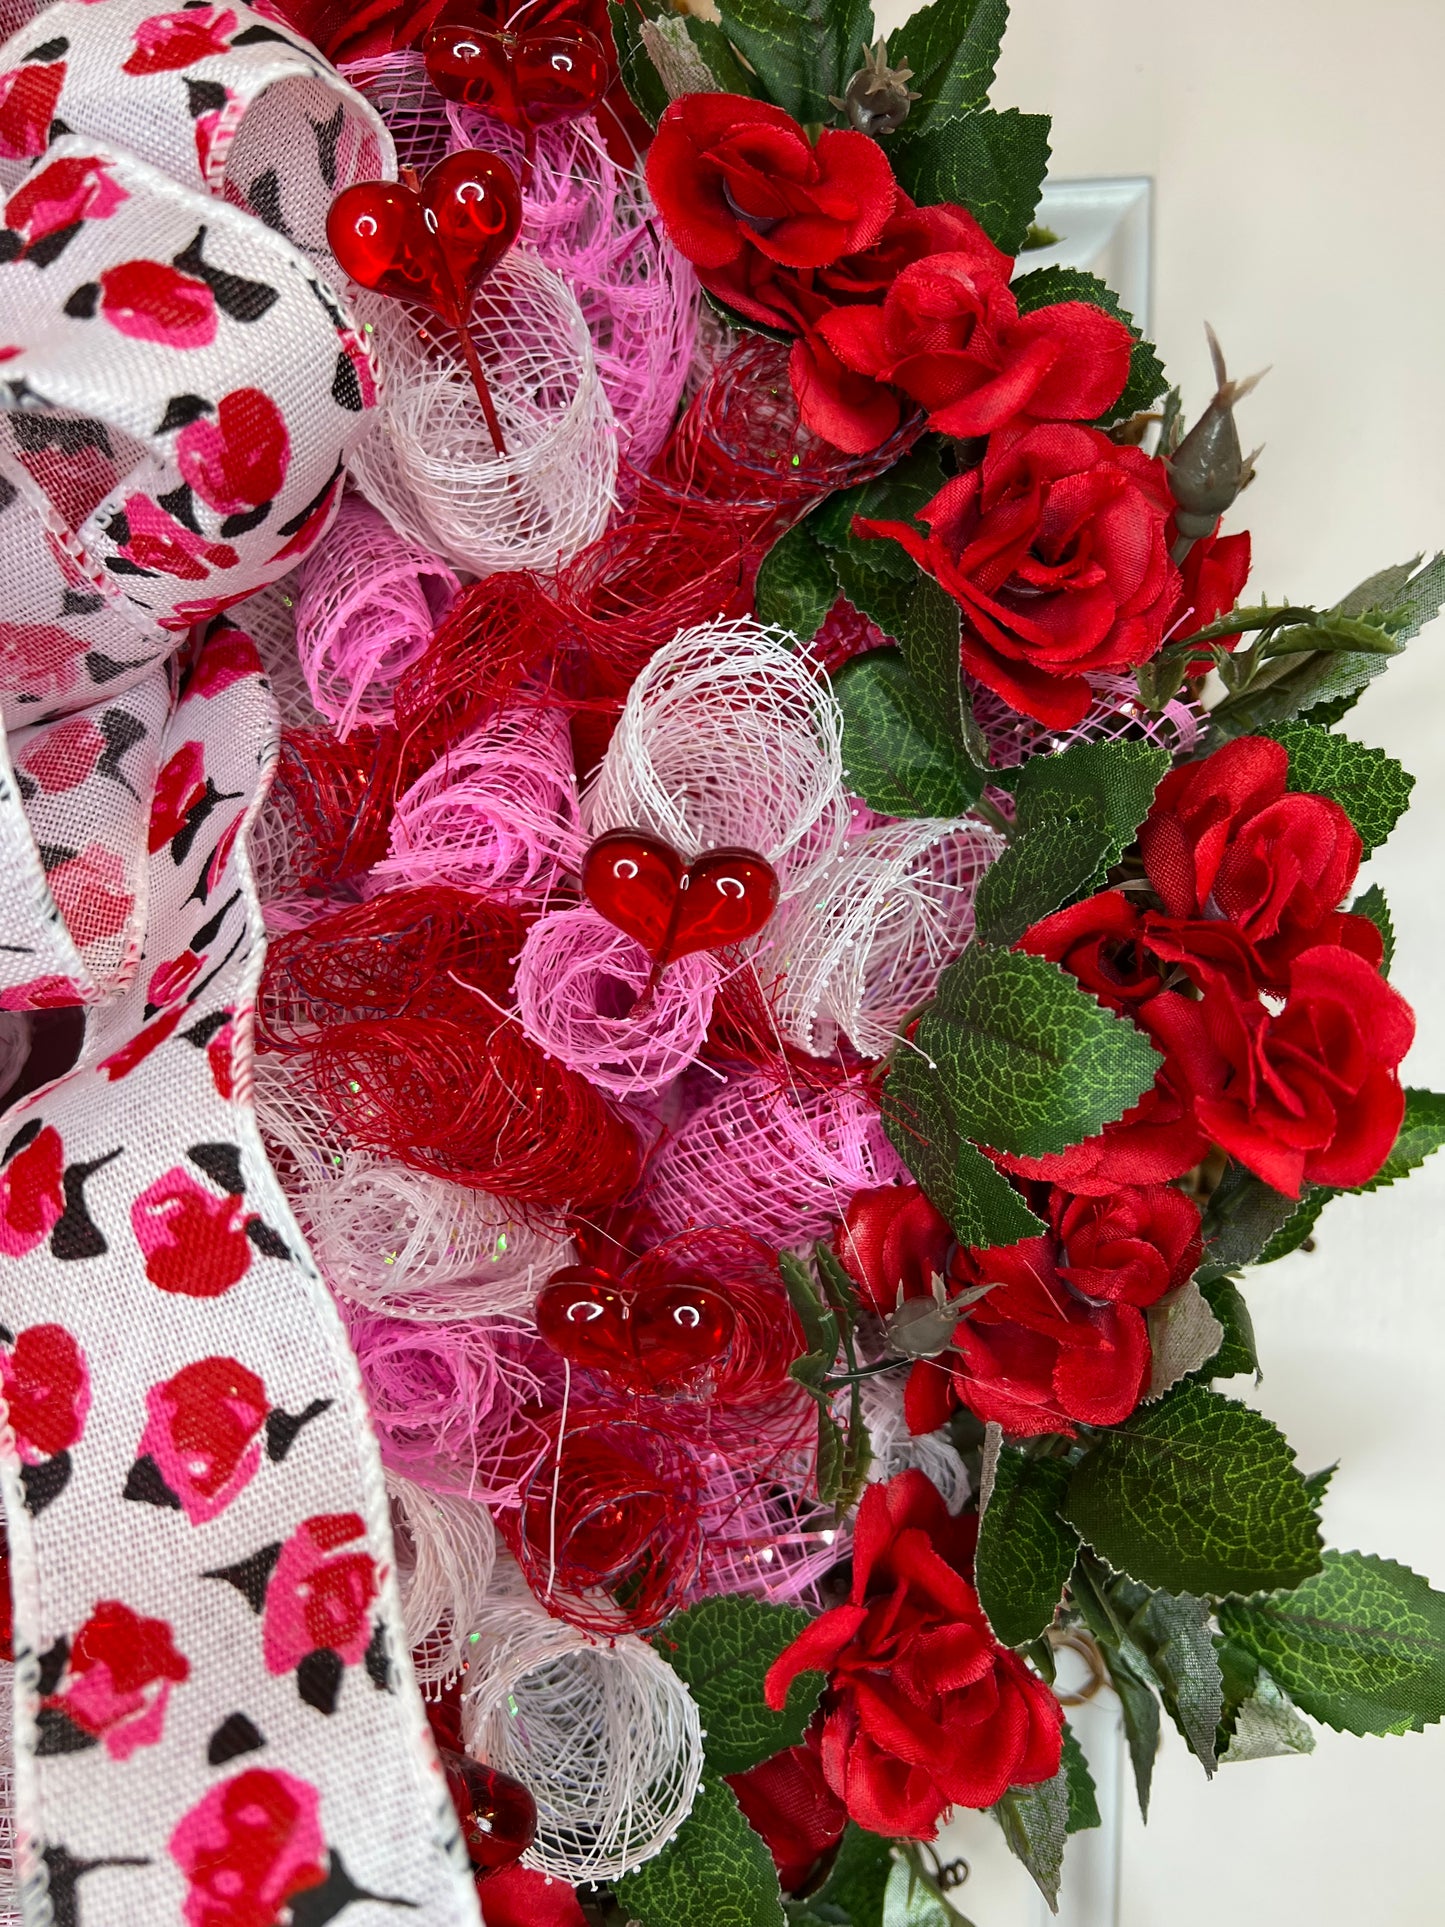 16" Red Roses and Deco Mesh Wreath